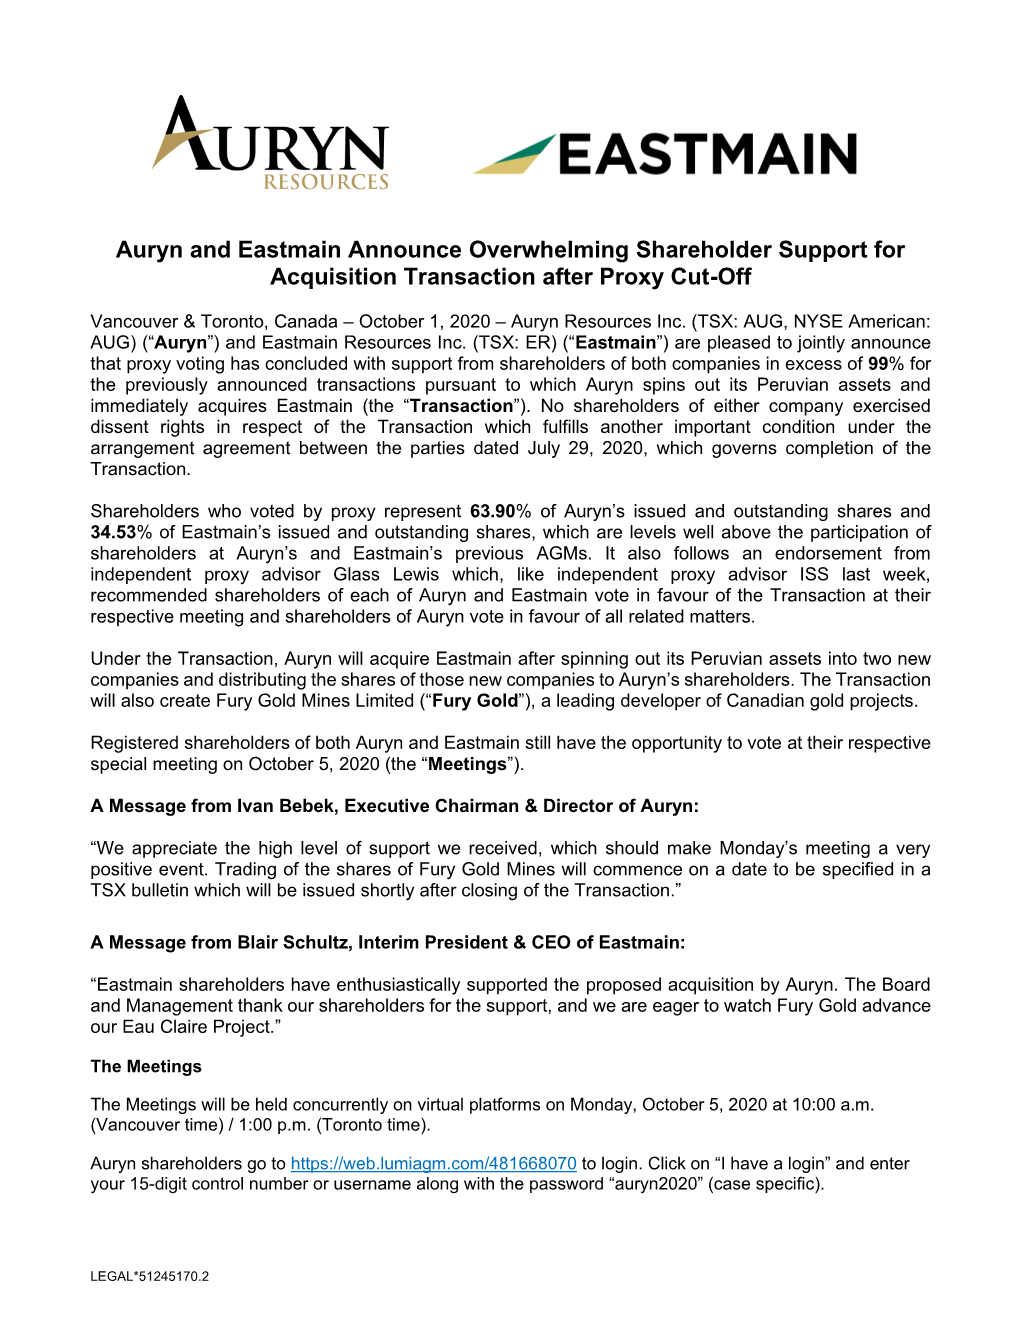 Auryn and Eastmain Announce Overwhelming Shareholder Support for Acquisition Transaction After Proxy Cut-Off